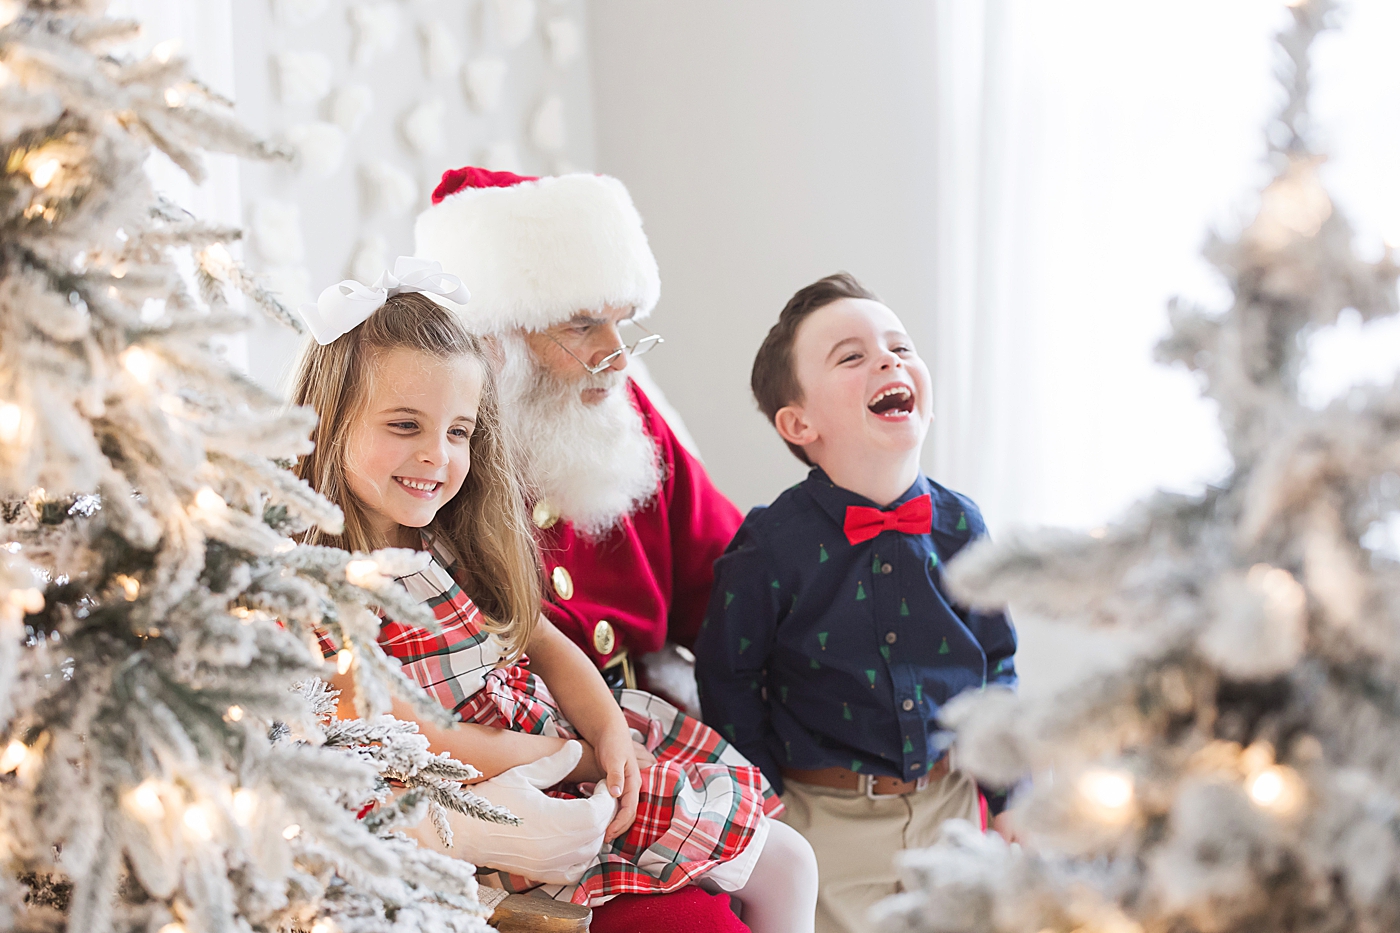 Kids laughing and visiting with Santa. Photo by Fresh Light Photography.